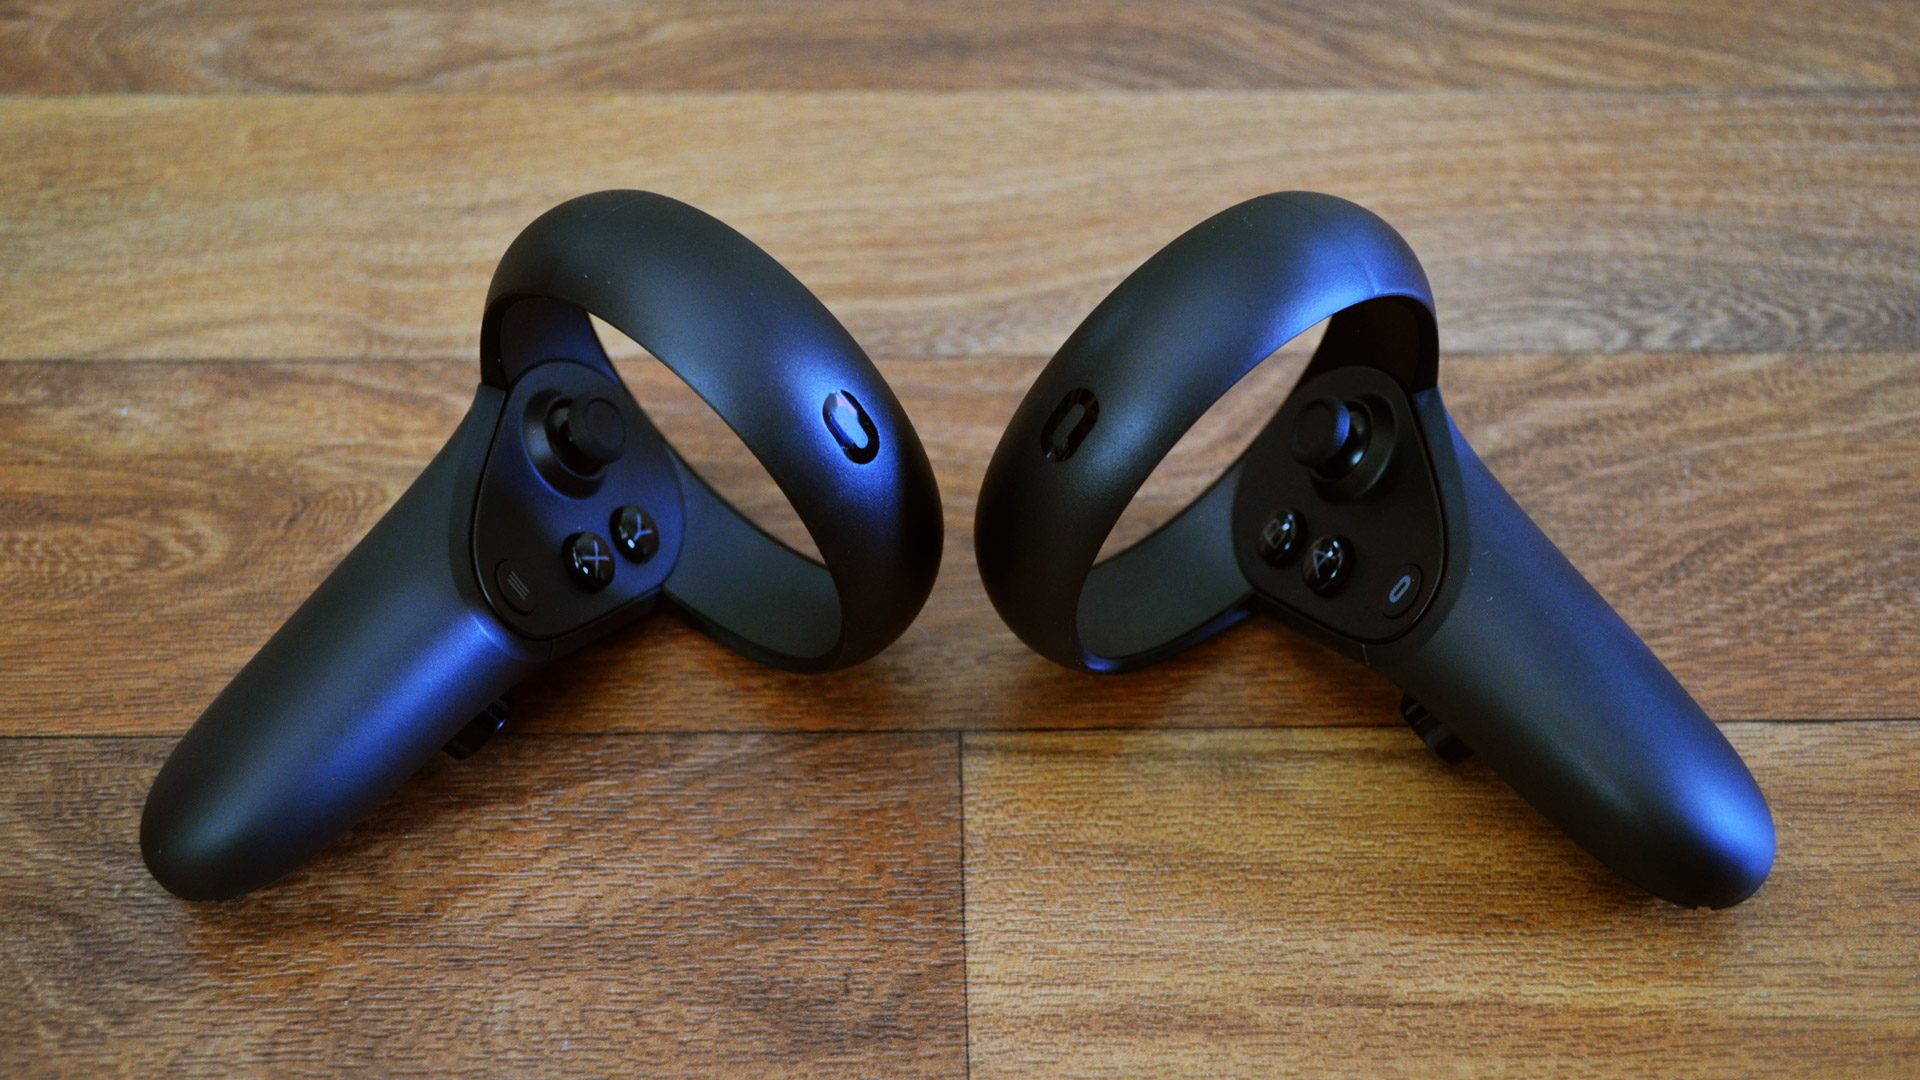 rift s controllers with cv1